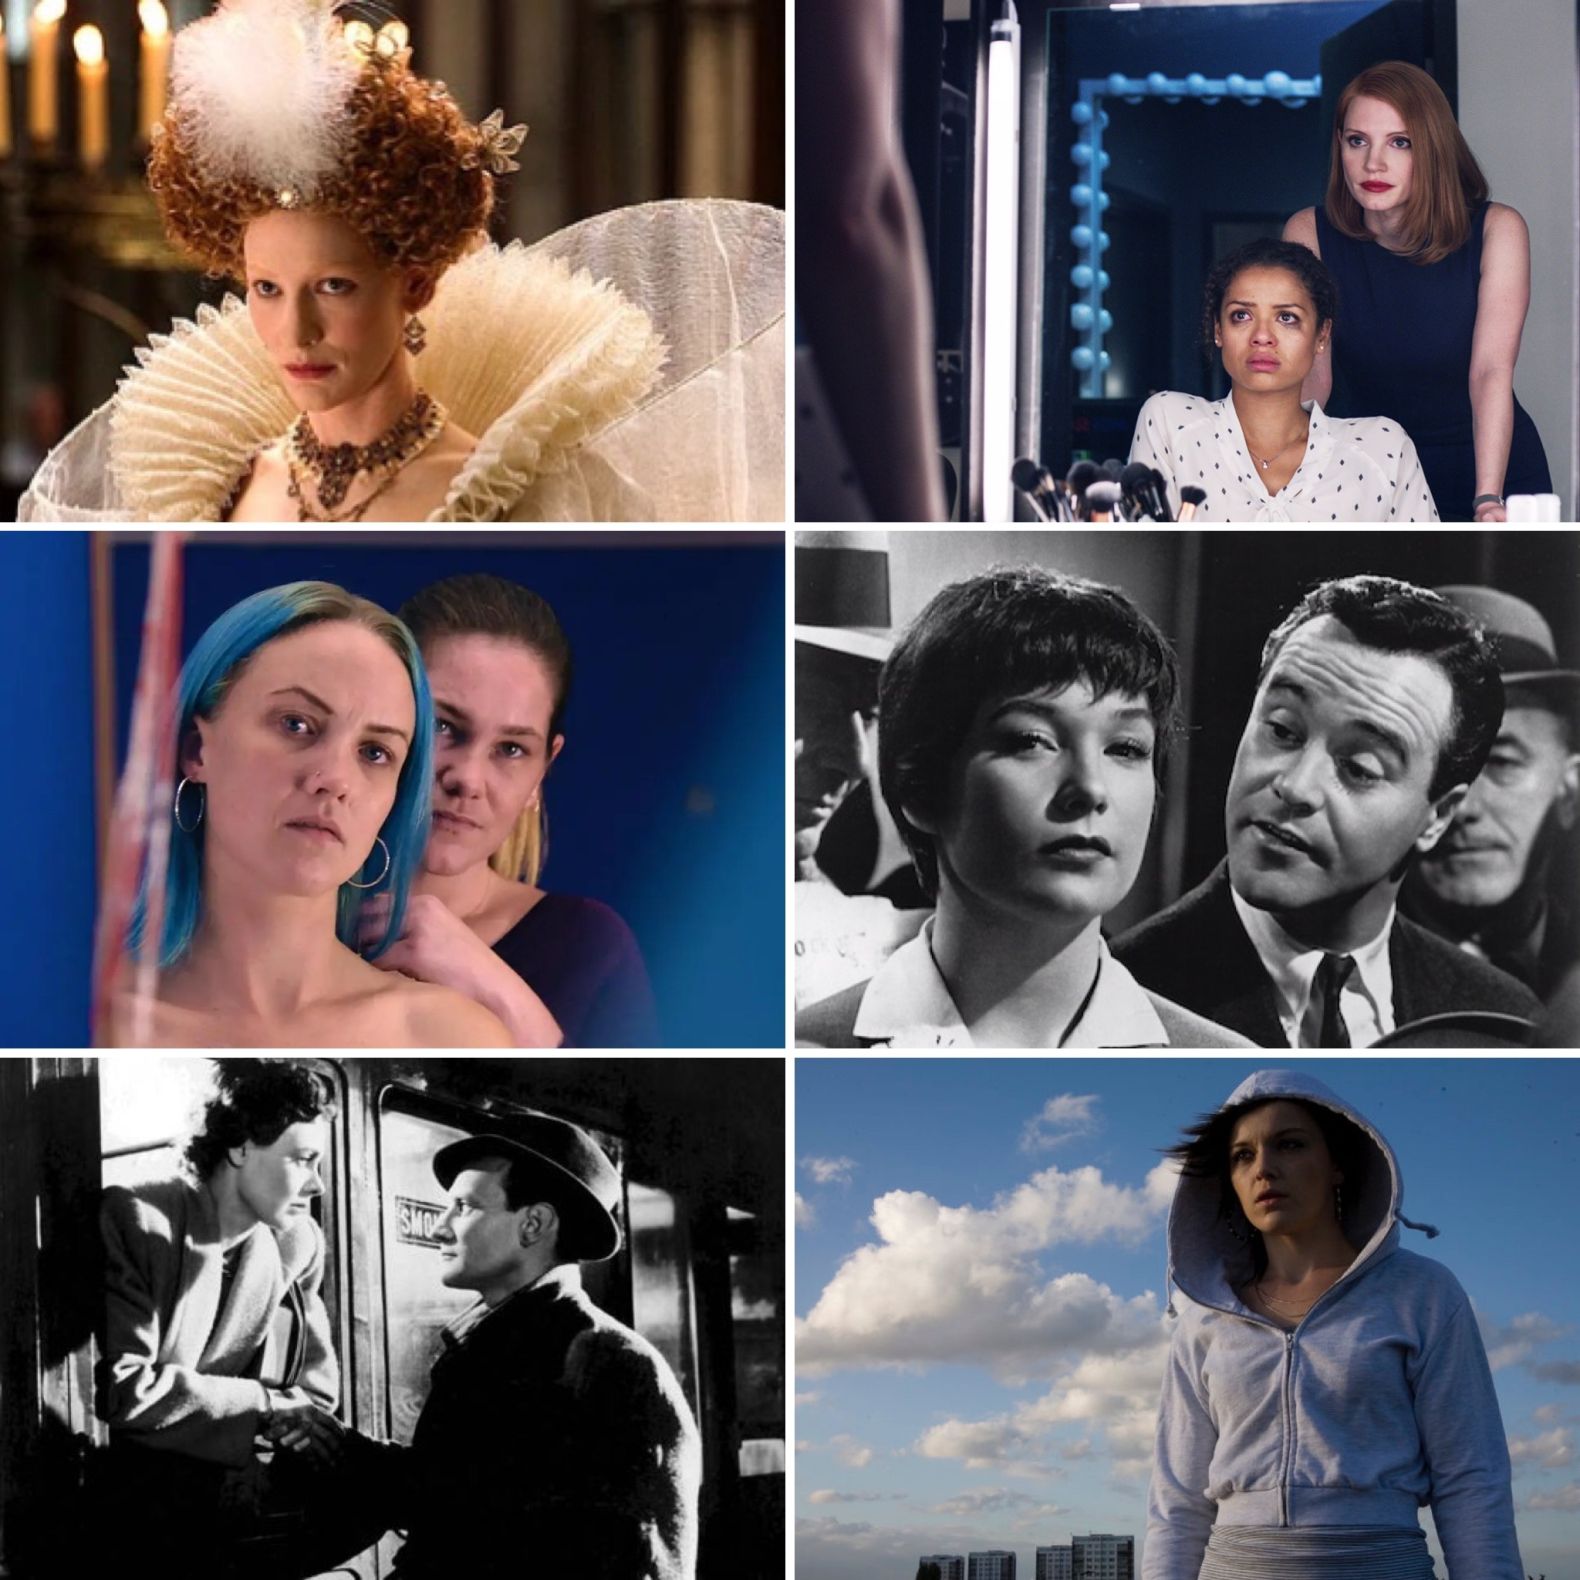 Duke Box #36: Our Guide to the Best Films on TV